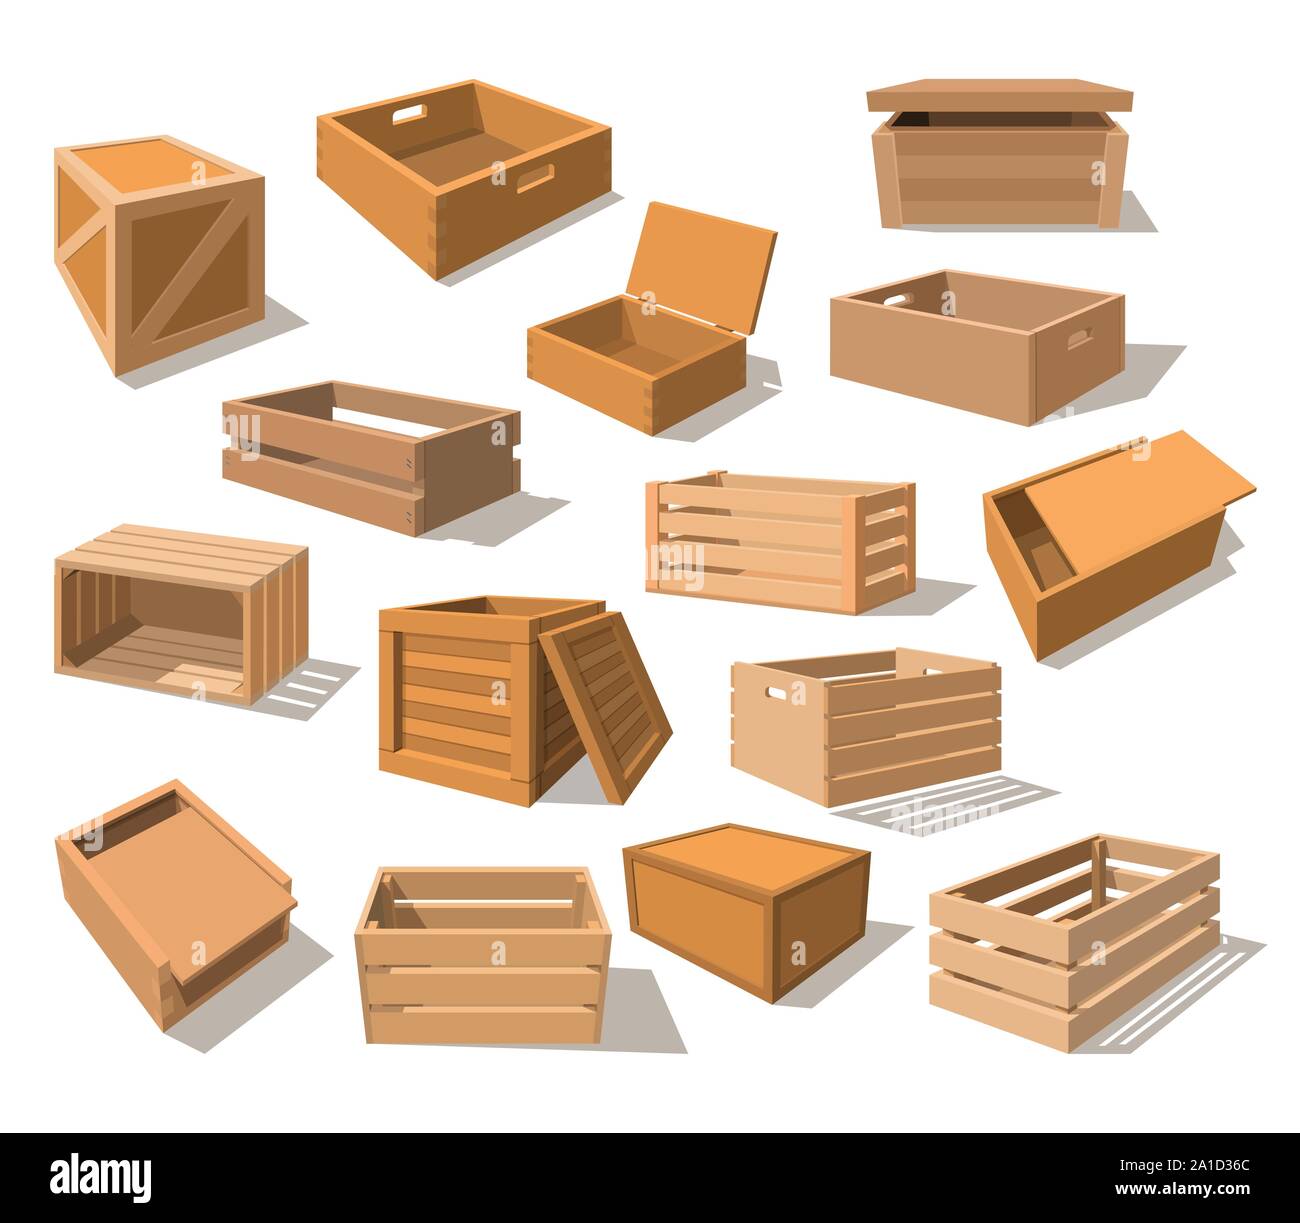 Wooden packages or realistic wood boxes Stock Vector